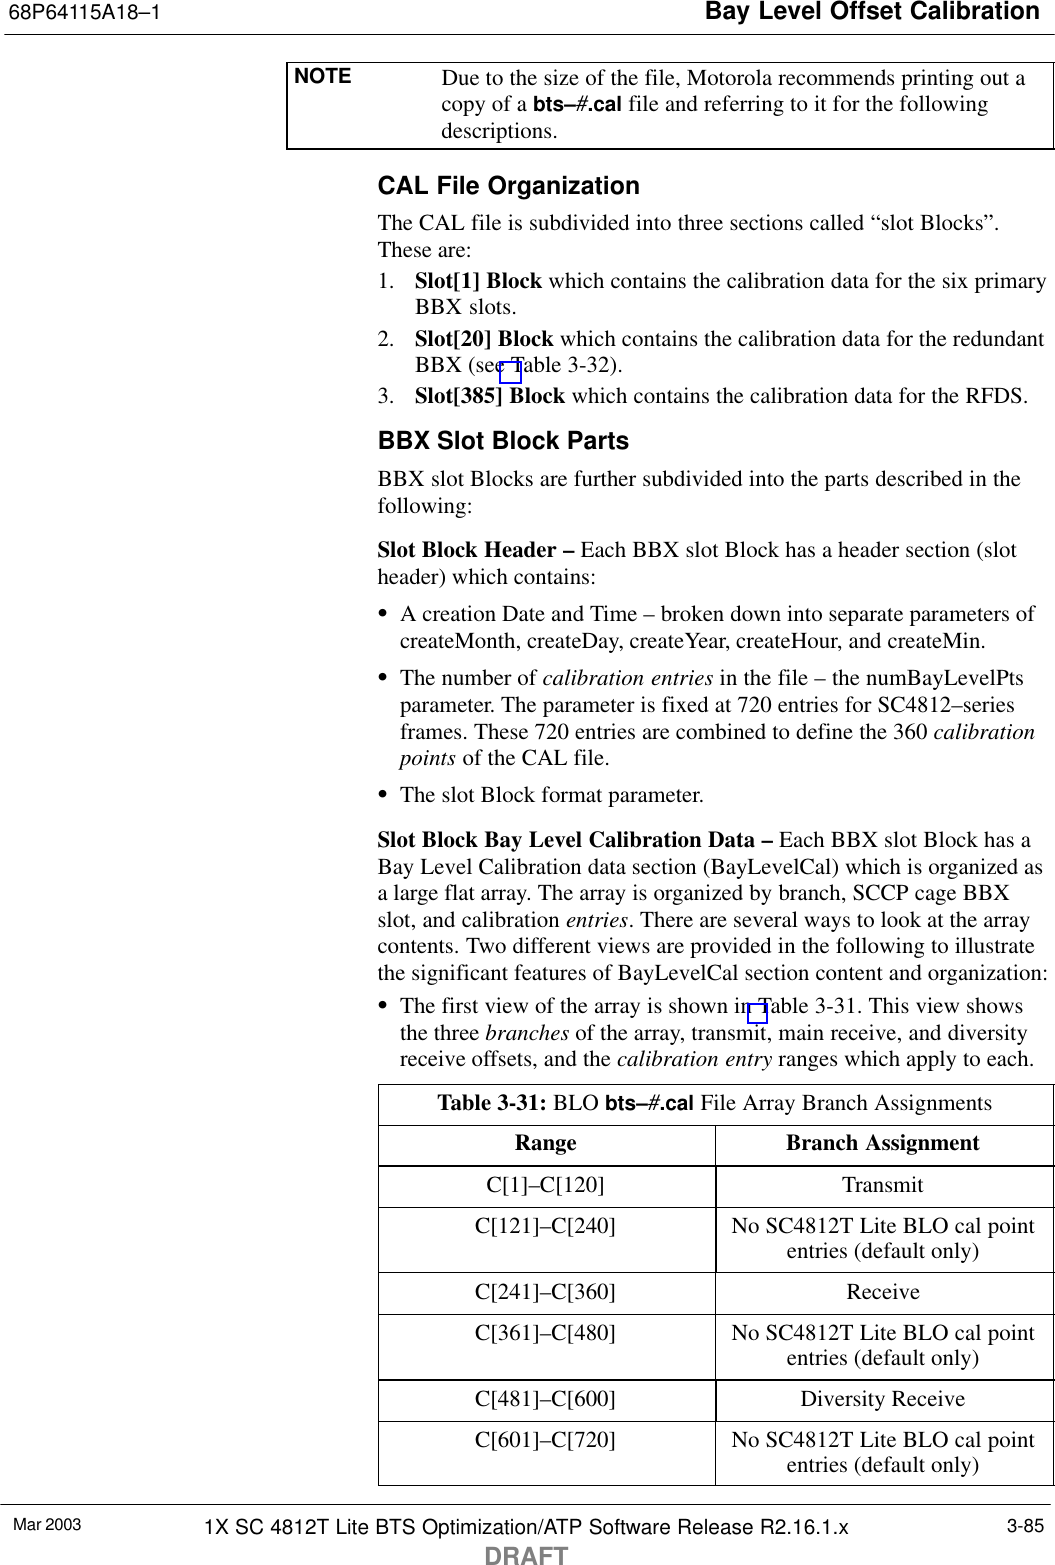 Bay Level Offset Calibration68P64115A18–1Mar 2003 1X SC 4812T Lite BTS Optimization/ATP Software Release R2.16.1.xDRAFT3-85NOTE Due to the size of the file, Motorola recommends printing out acopy of a bts–#.cal file and referring to it for the followingdescriptions.CAL File OrganizationThe CAL file is subdivided into three sections called “slot Blocks”.These are:1. Slot[1] Block which contains the calibration data for the six primaryBBX slots.2. Slot[20] Block which contains the calibration data for the redundantBBX (see Table 3-32).3. Slot[385] Block which contains the calibration data for the RFDS.BBX Slot Block PartsBBX slot Blocks are further subdivided into the parts described in thefollowing:Slot Block Header – Each BBX slot Block has a header section (slotheader) which contains:SA creation Date and Time – broken down into separate parameters ofcreateMonth, createDay, createYear, createHour, and createMin.SThe number of calibration entries in the file – the numBayLevelPtsparameter. The parameter is fixed at 720 entries for SC4812–seriesframes. These 720 entries are combined to define the 360 calibrationpoints of the CAL file.SThe slot Block format parameter.Slot Block Bay Level Calibration Data – Each BBX slot Block has aBay Level Calibration data section (BayLevelCal) which is organized asa large flat array. The array is organized by branch, SCCP cage BBXslot, and calibration entries. There are several ways to look at the arraycontents. Two different views are provided in the following to illustratethe significant features of BayLevelCal section content and organization:SThe first view of the array is shown in Table 3-31. This view showsthe three branches of the array, transmit, main receive, and diversityreceive offsets, and the calibration entry ranges which apply to each.Table 3-31: BLO bts–#.cal File Array Branch AssignmentsRange Branch AssignmentC[1]–C[120] TransmitC[121]–C[240] No SC4812T Lite BLO cal pointentries (default only)C[241]–C[360] ReceiveC[361]–C[480] No SC4812T Lite BLO cal pointentries (default only)C[481]–C[600] Diversity ReceiveC[601]–C[720] No SC4812T Lite BLO cal pointentries (default only)